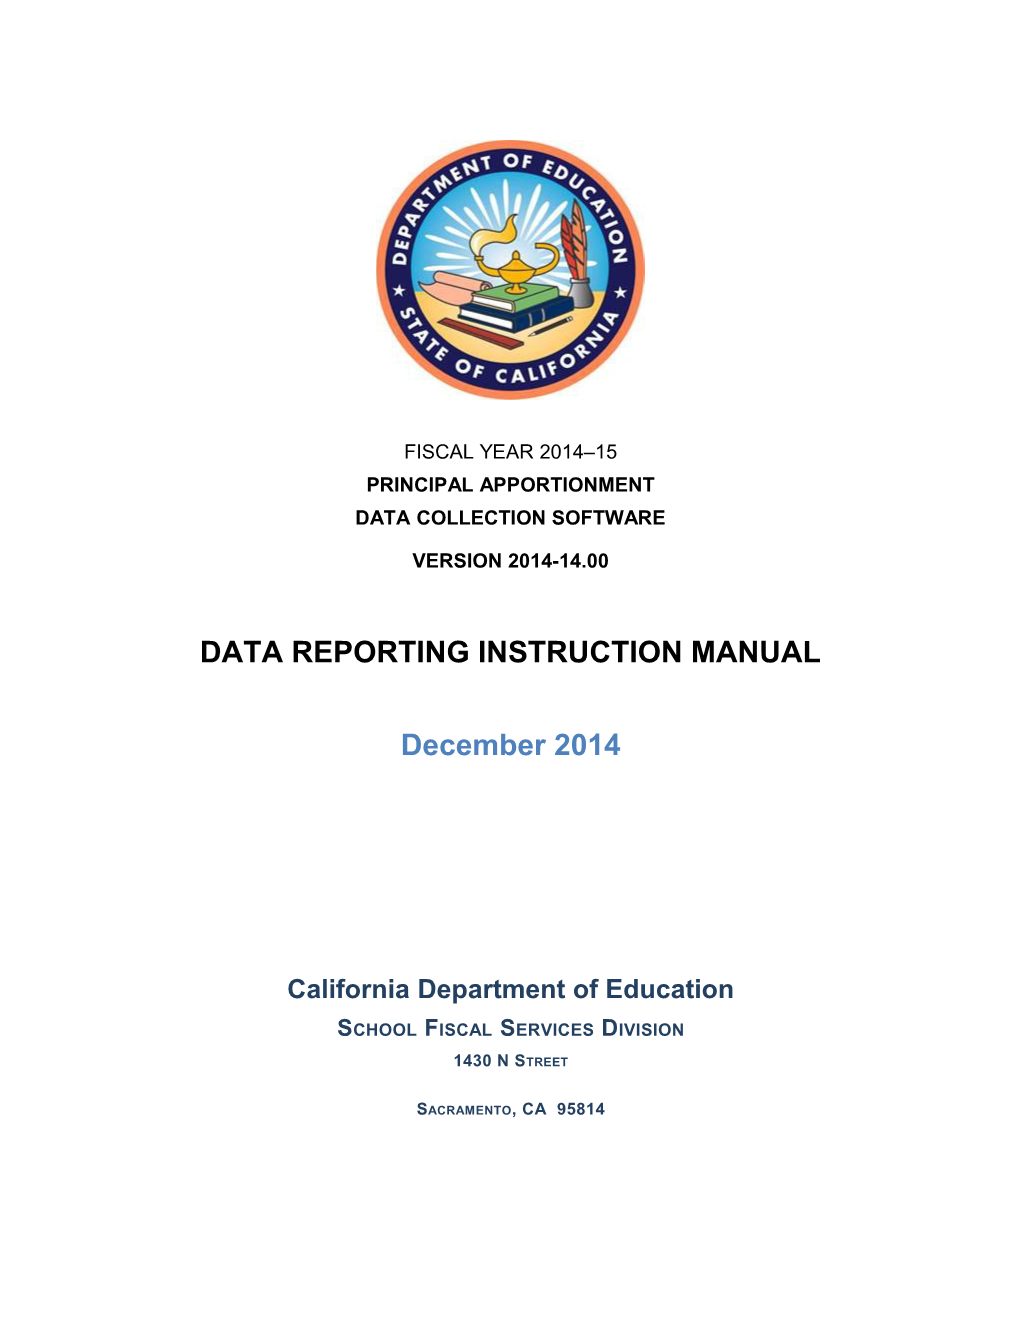 Data Reporting Instruction Manual, FY 2014-15 - Principal Apportionment (CA Dept of Education)